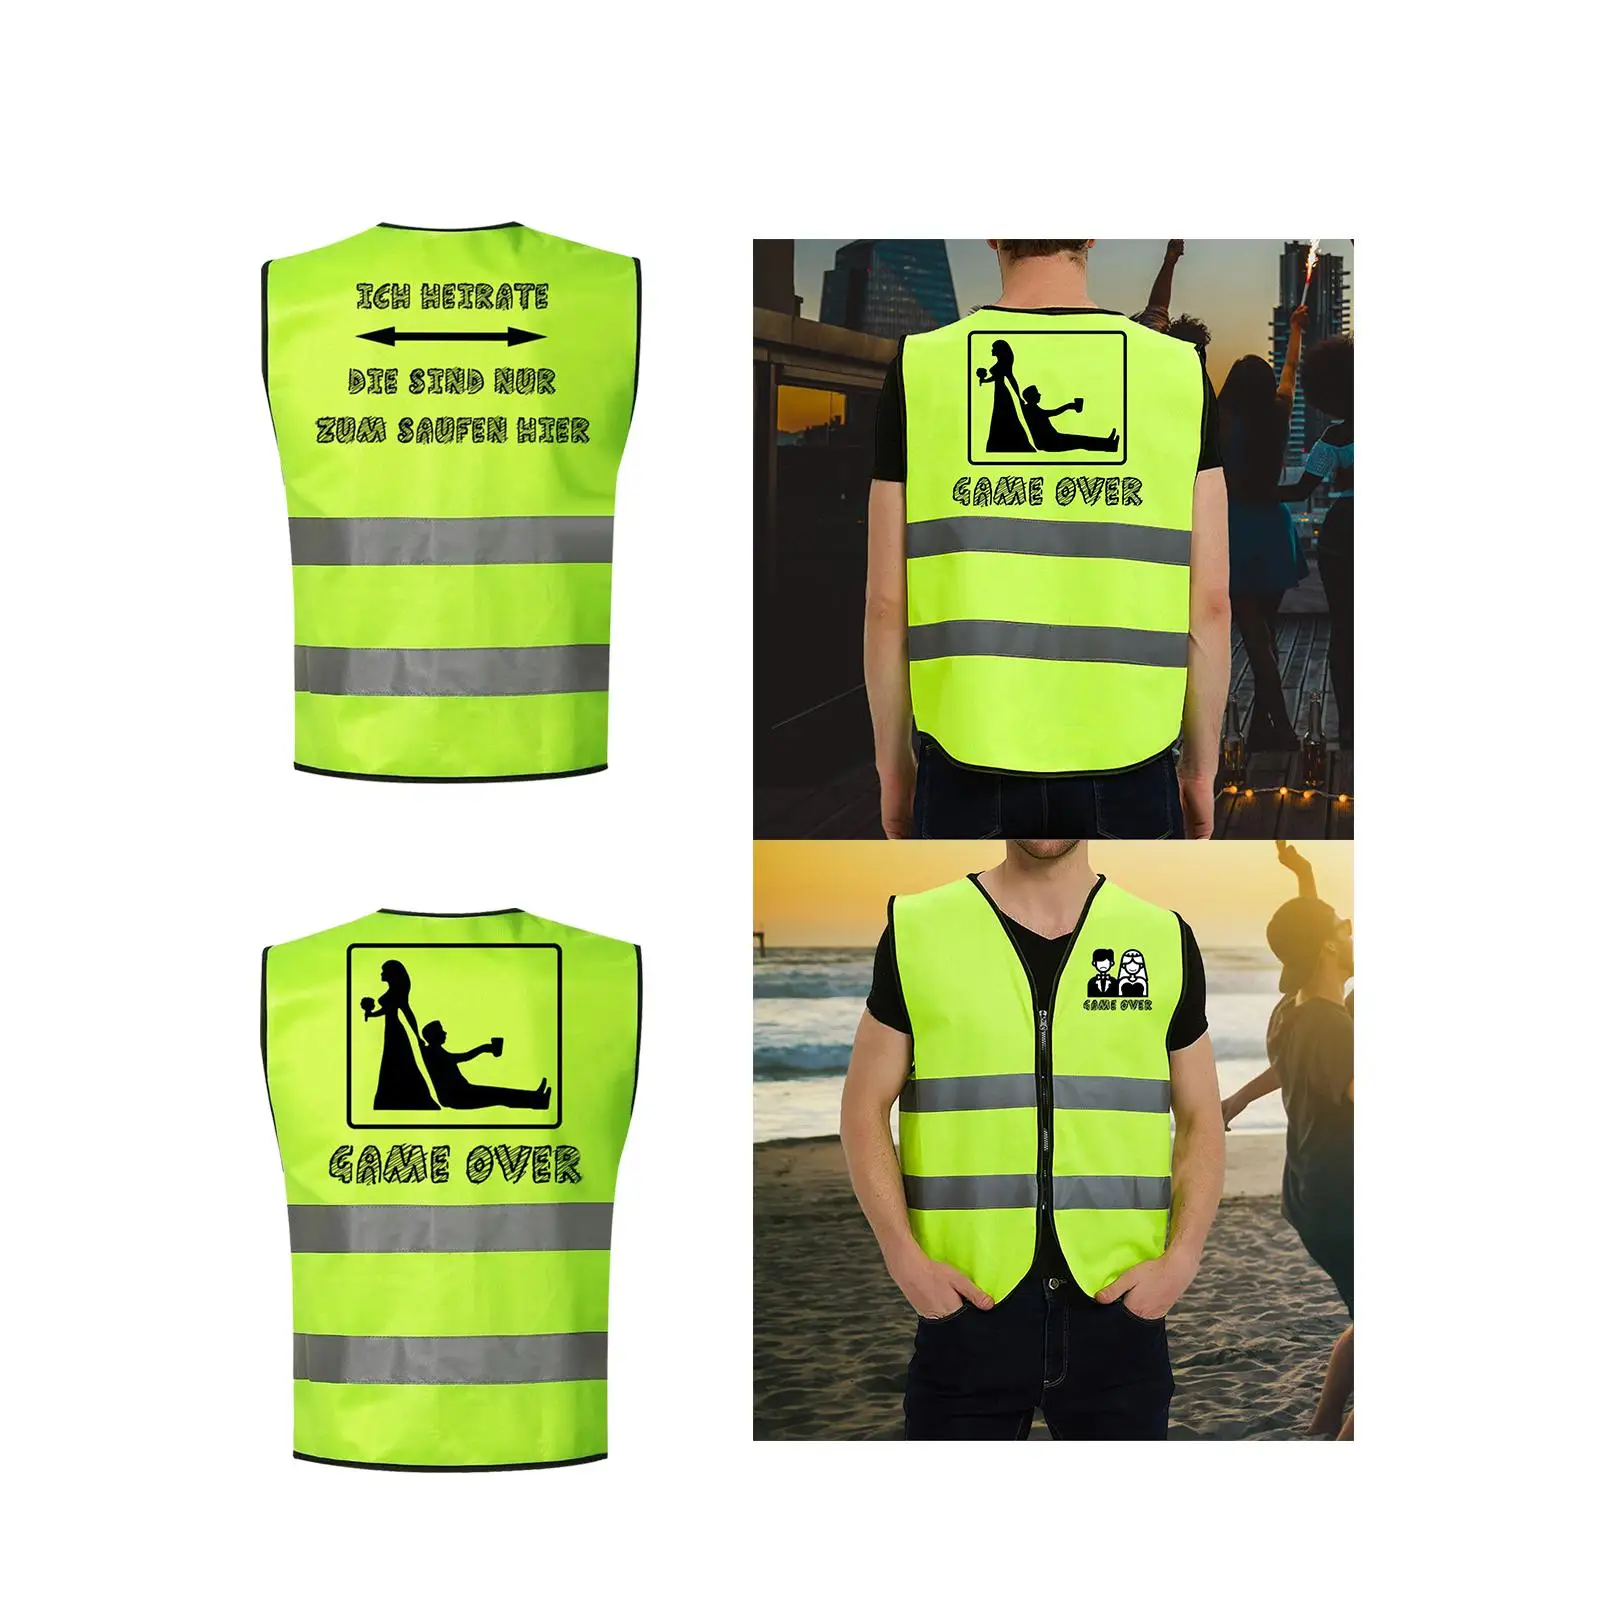 Party Security Vest Male Prop Costumes for Halloween Night Welding Carnivals